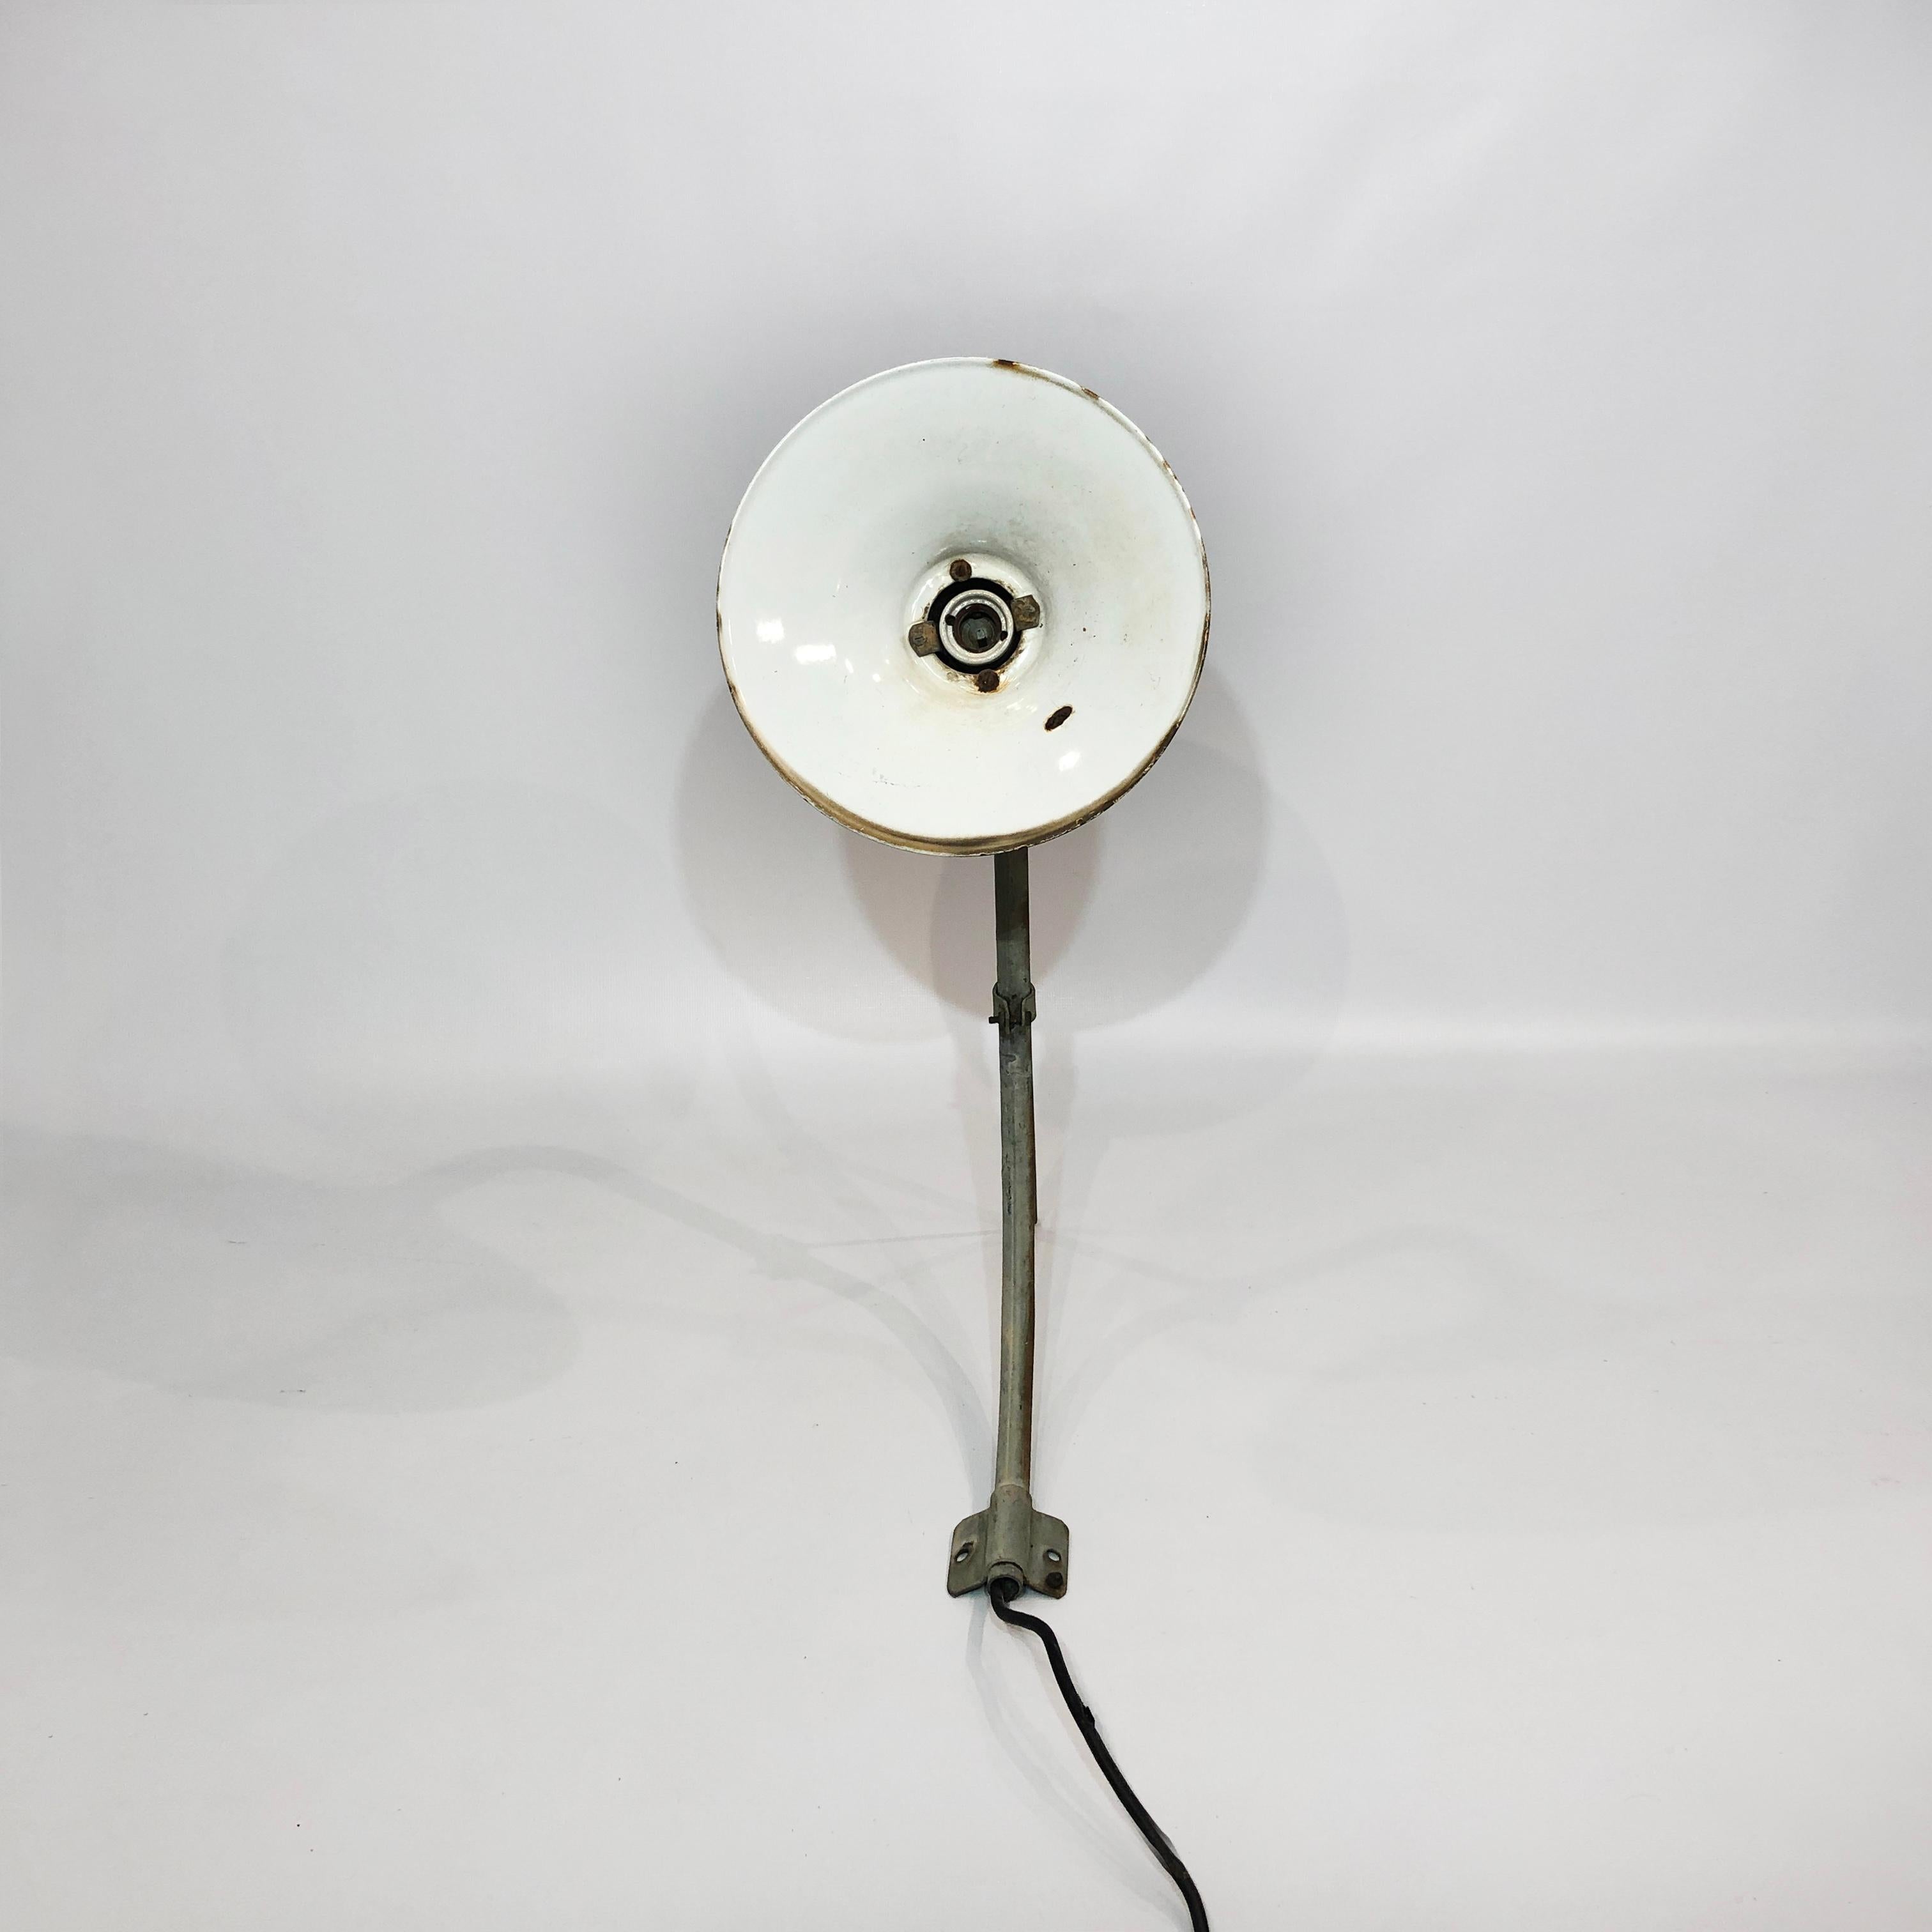 Large Industrial Wall Light 1 of 3 1950s Vintage Retro Commercial Lighting Lamp 3